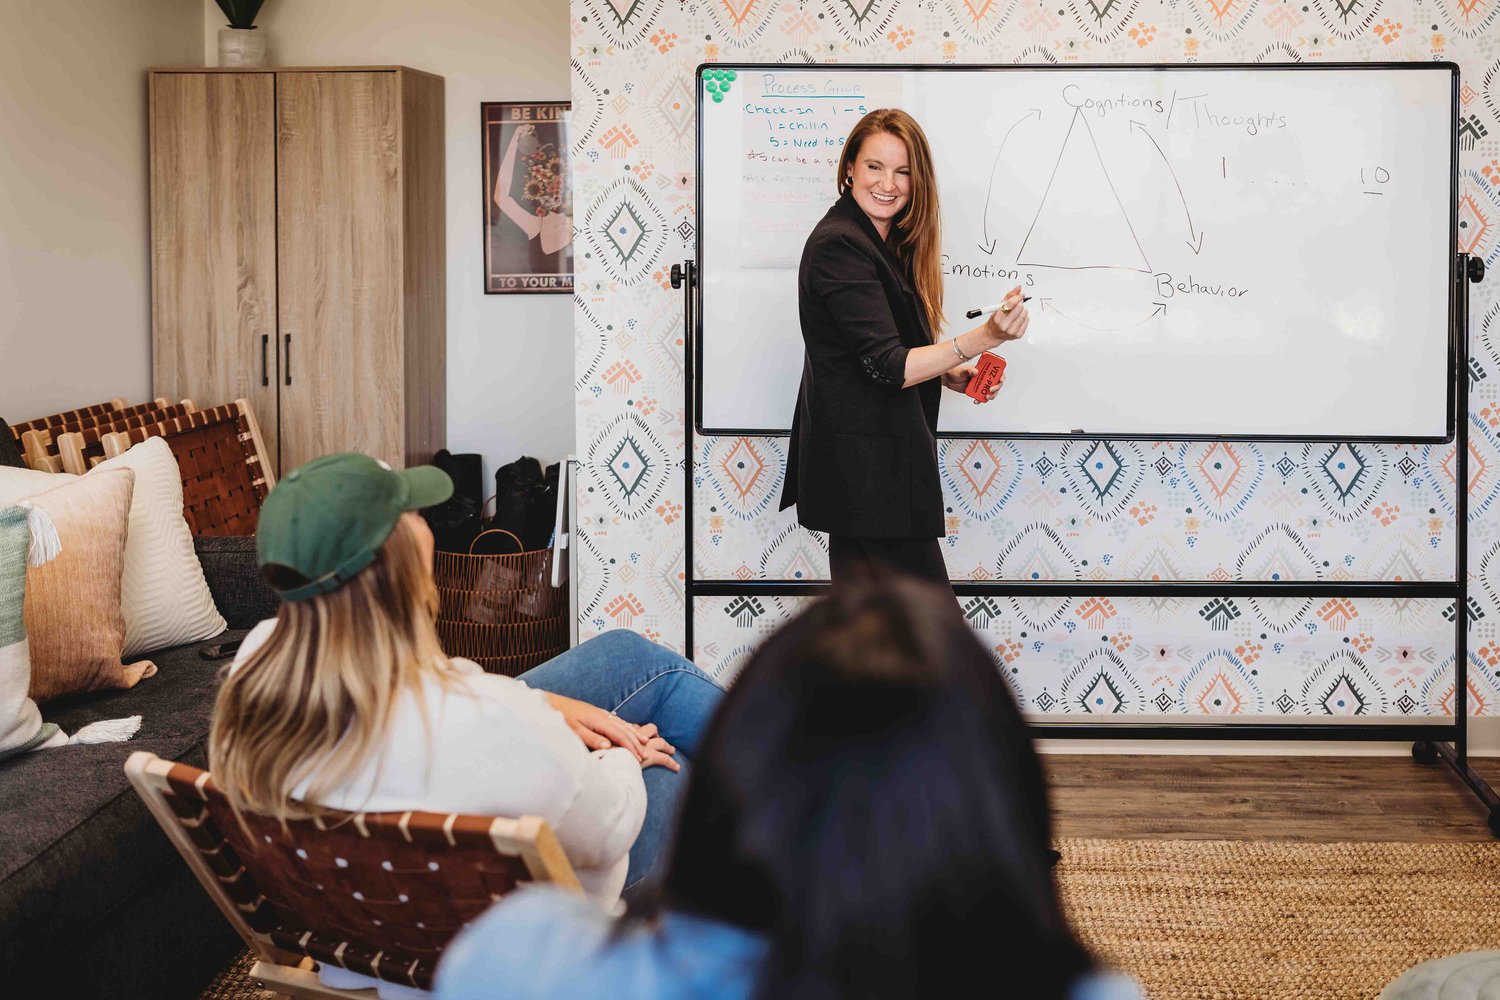 Group Therapy; a smiling woman drawing a triangle on a whiteboard, illustrating a cycle of Cognition/thoughts, emotions, and behavior to a group of women sitting behind her